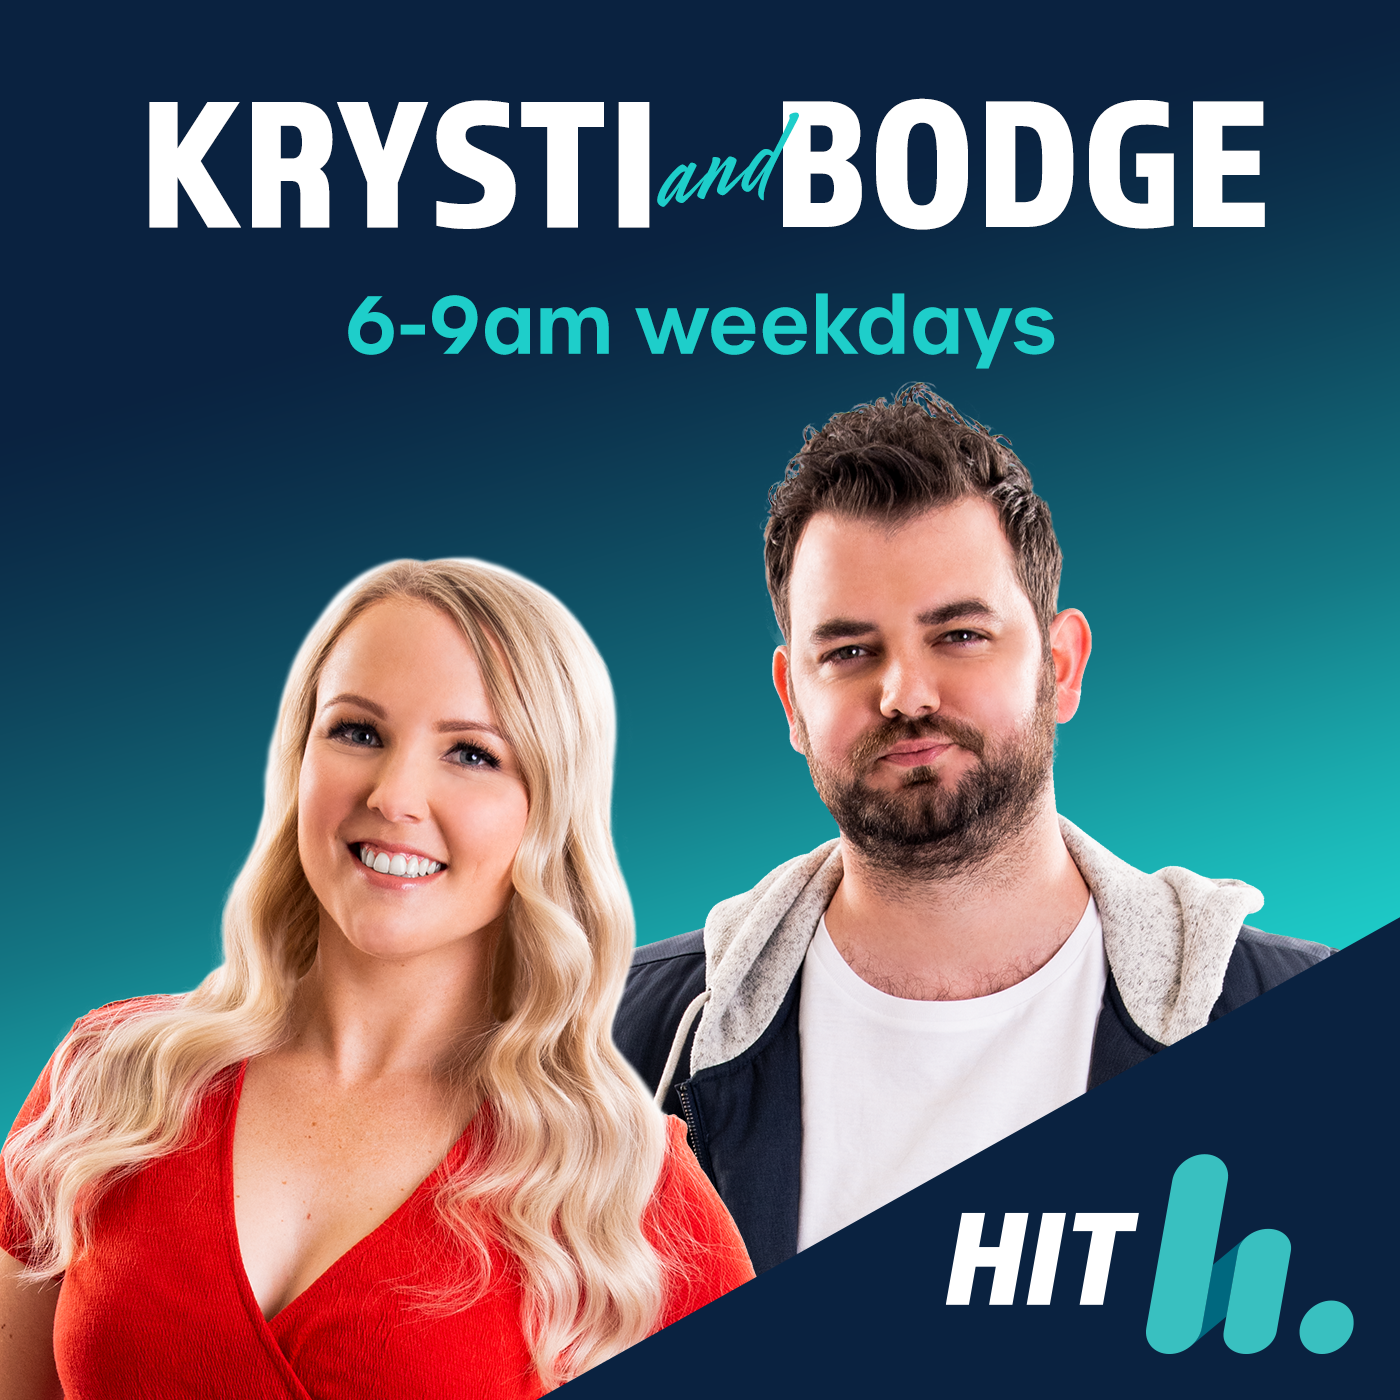 Krysti & Bodge - Paranormal Researchers Make Contact, Strange Animal Facts, Riddle Me This